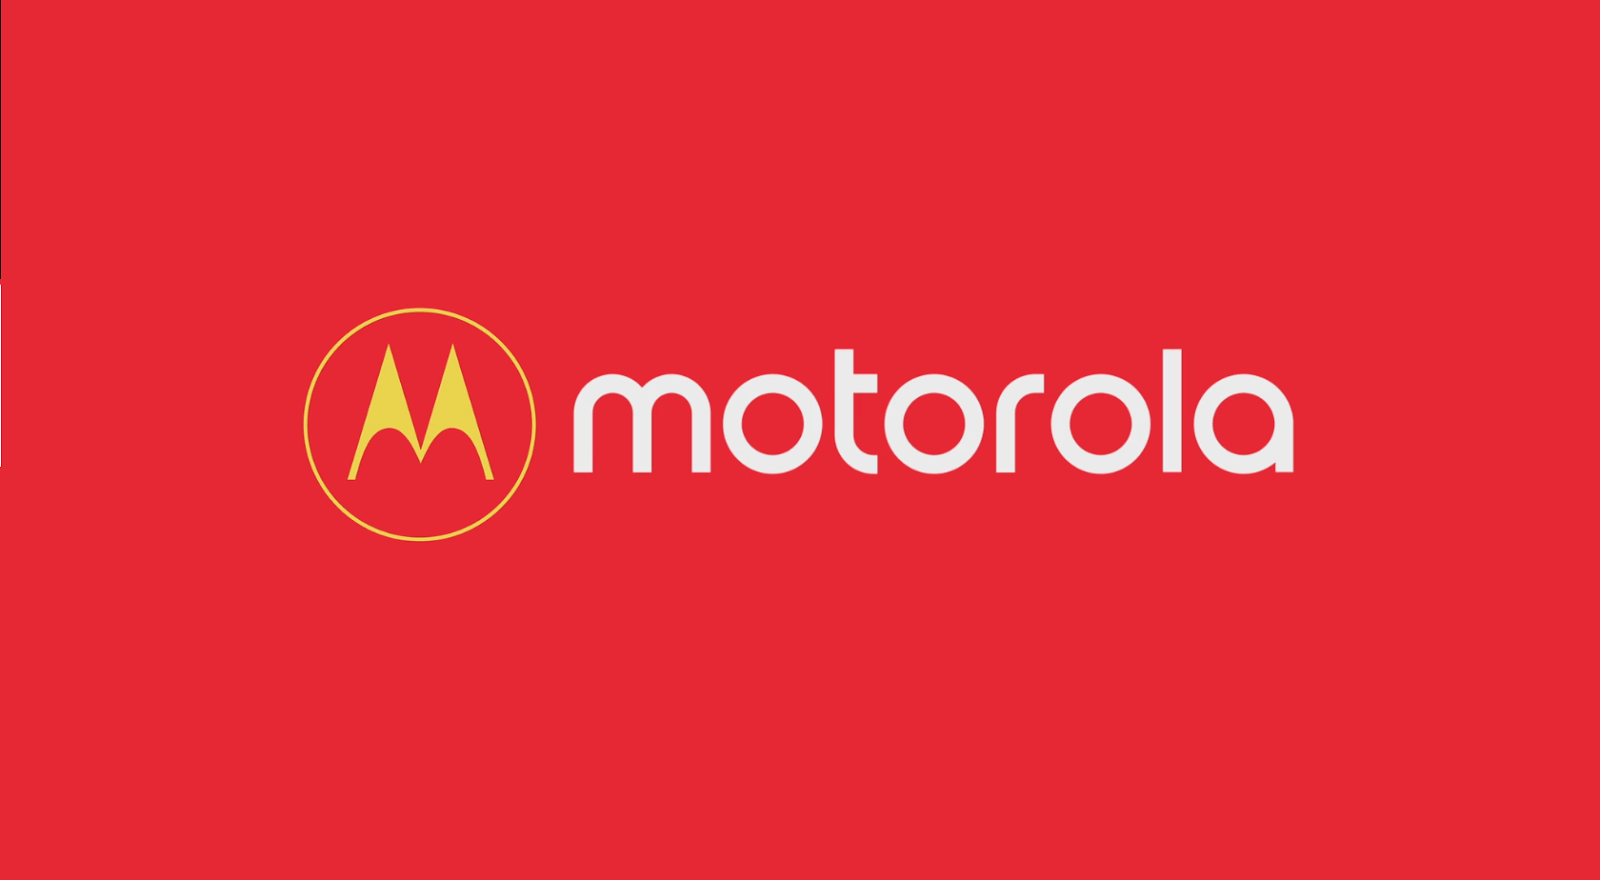 First Motorola Logo - Motorola's approaching from the announcement of the Motorola One is ...